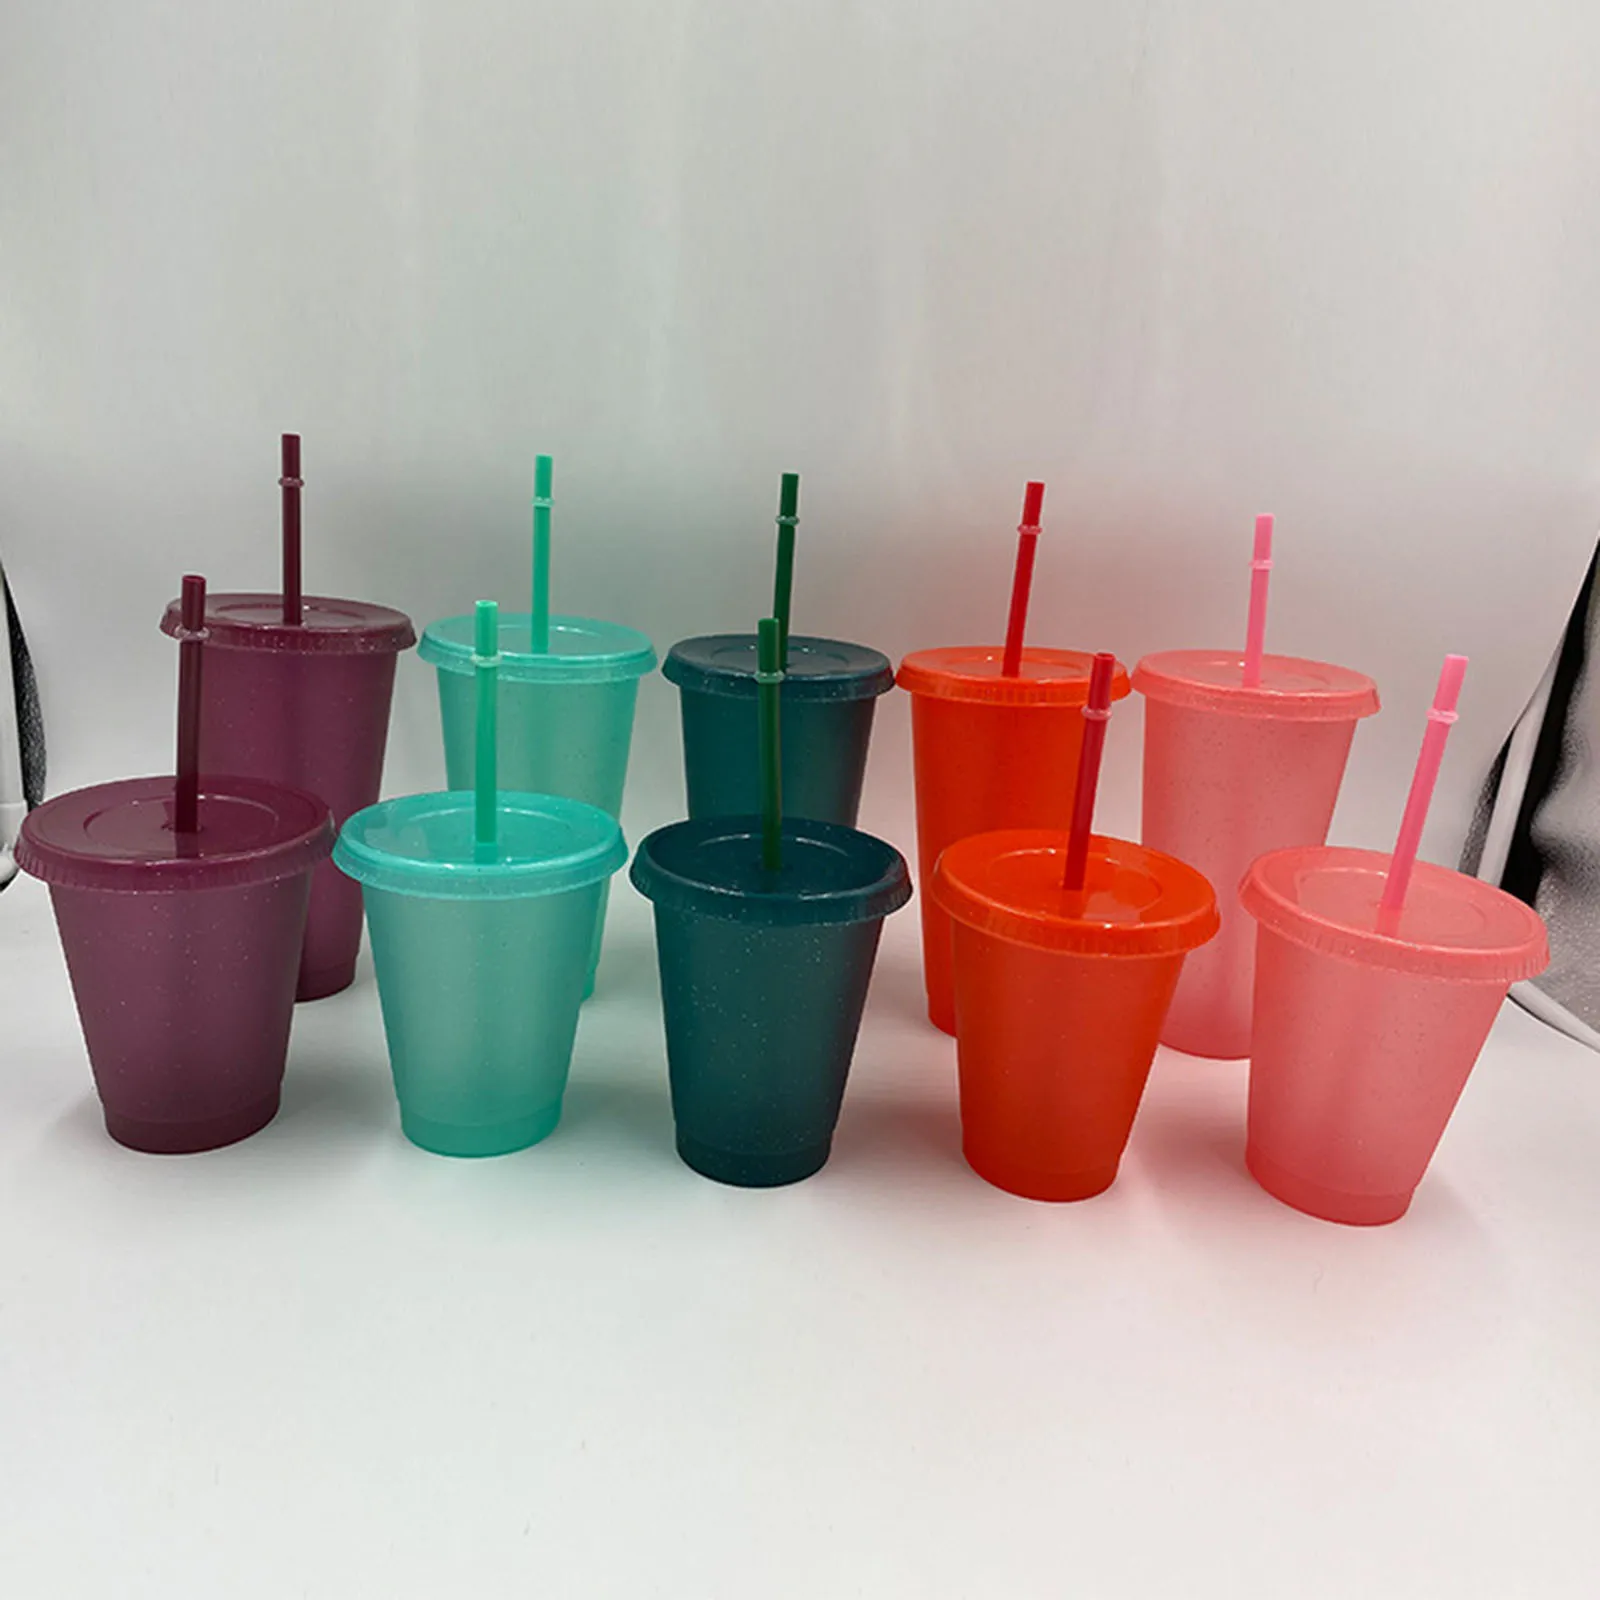 https://ae01.alicdn.com/kf/S90b23d8c7a2940beaaf979b741ce2173l/710ml-Plastic-Water-Bottle-Straw-Cup-Modern-for-Travel-Shopping-Friends-Gifts-Reusable-Plastic-Water-Bottle.jpg